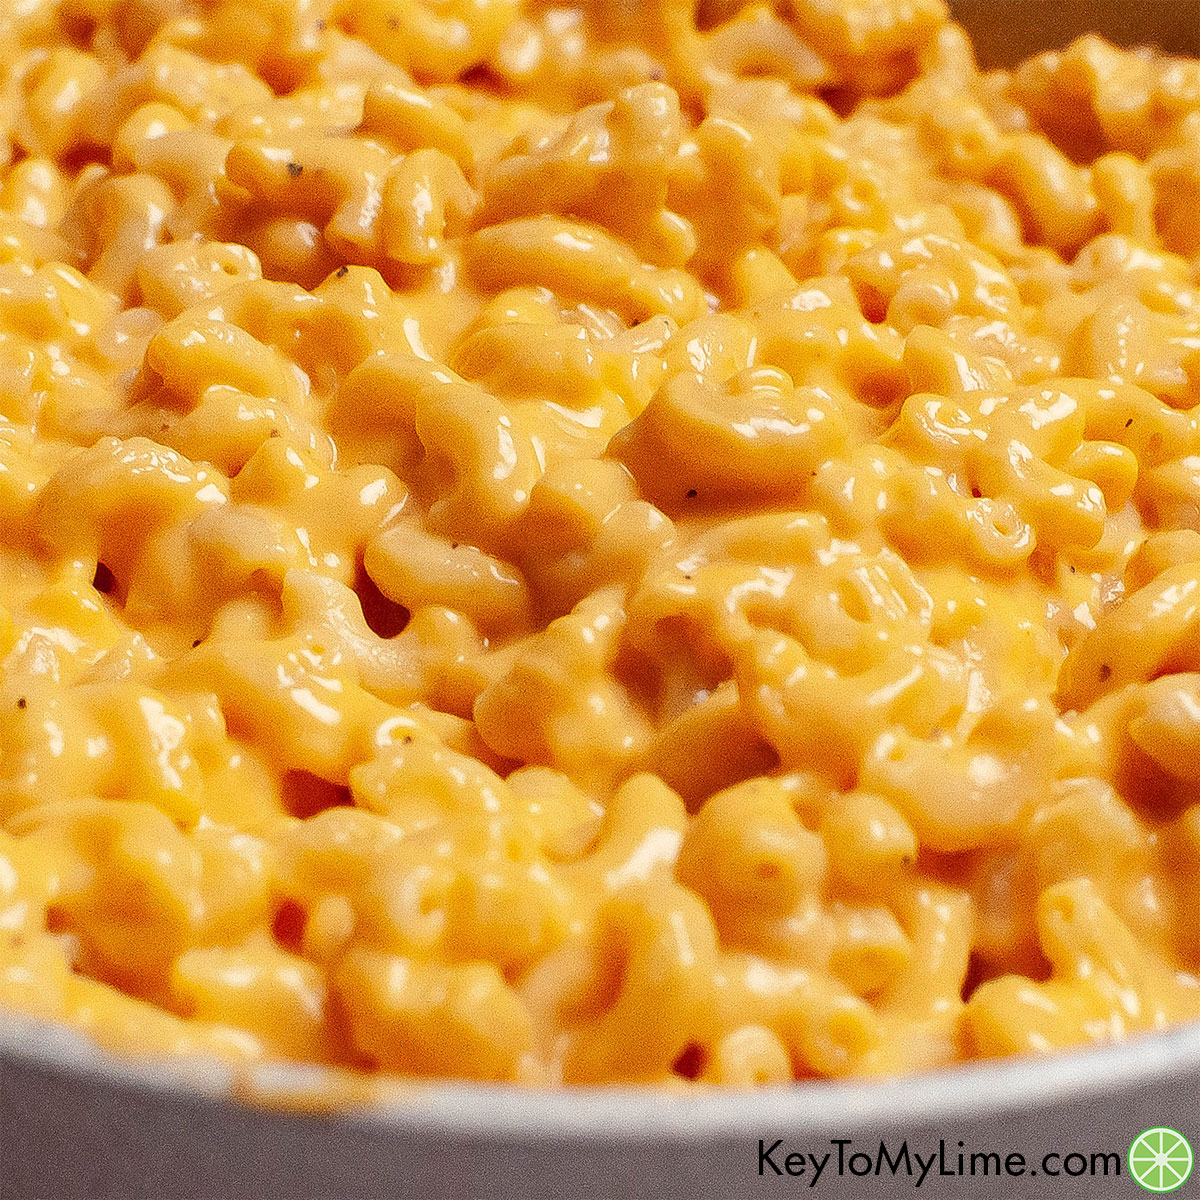 The best pioneer woman mac and cheese recipe.